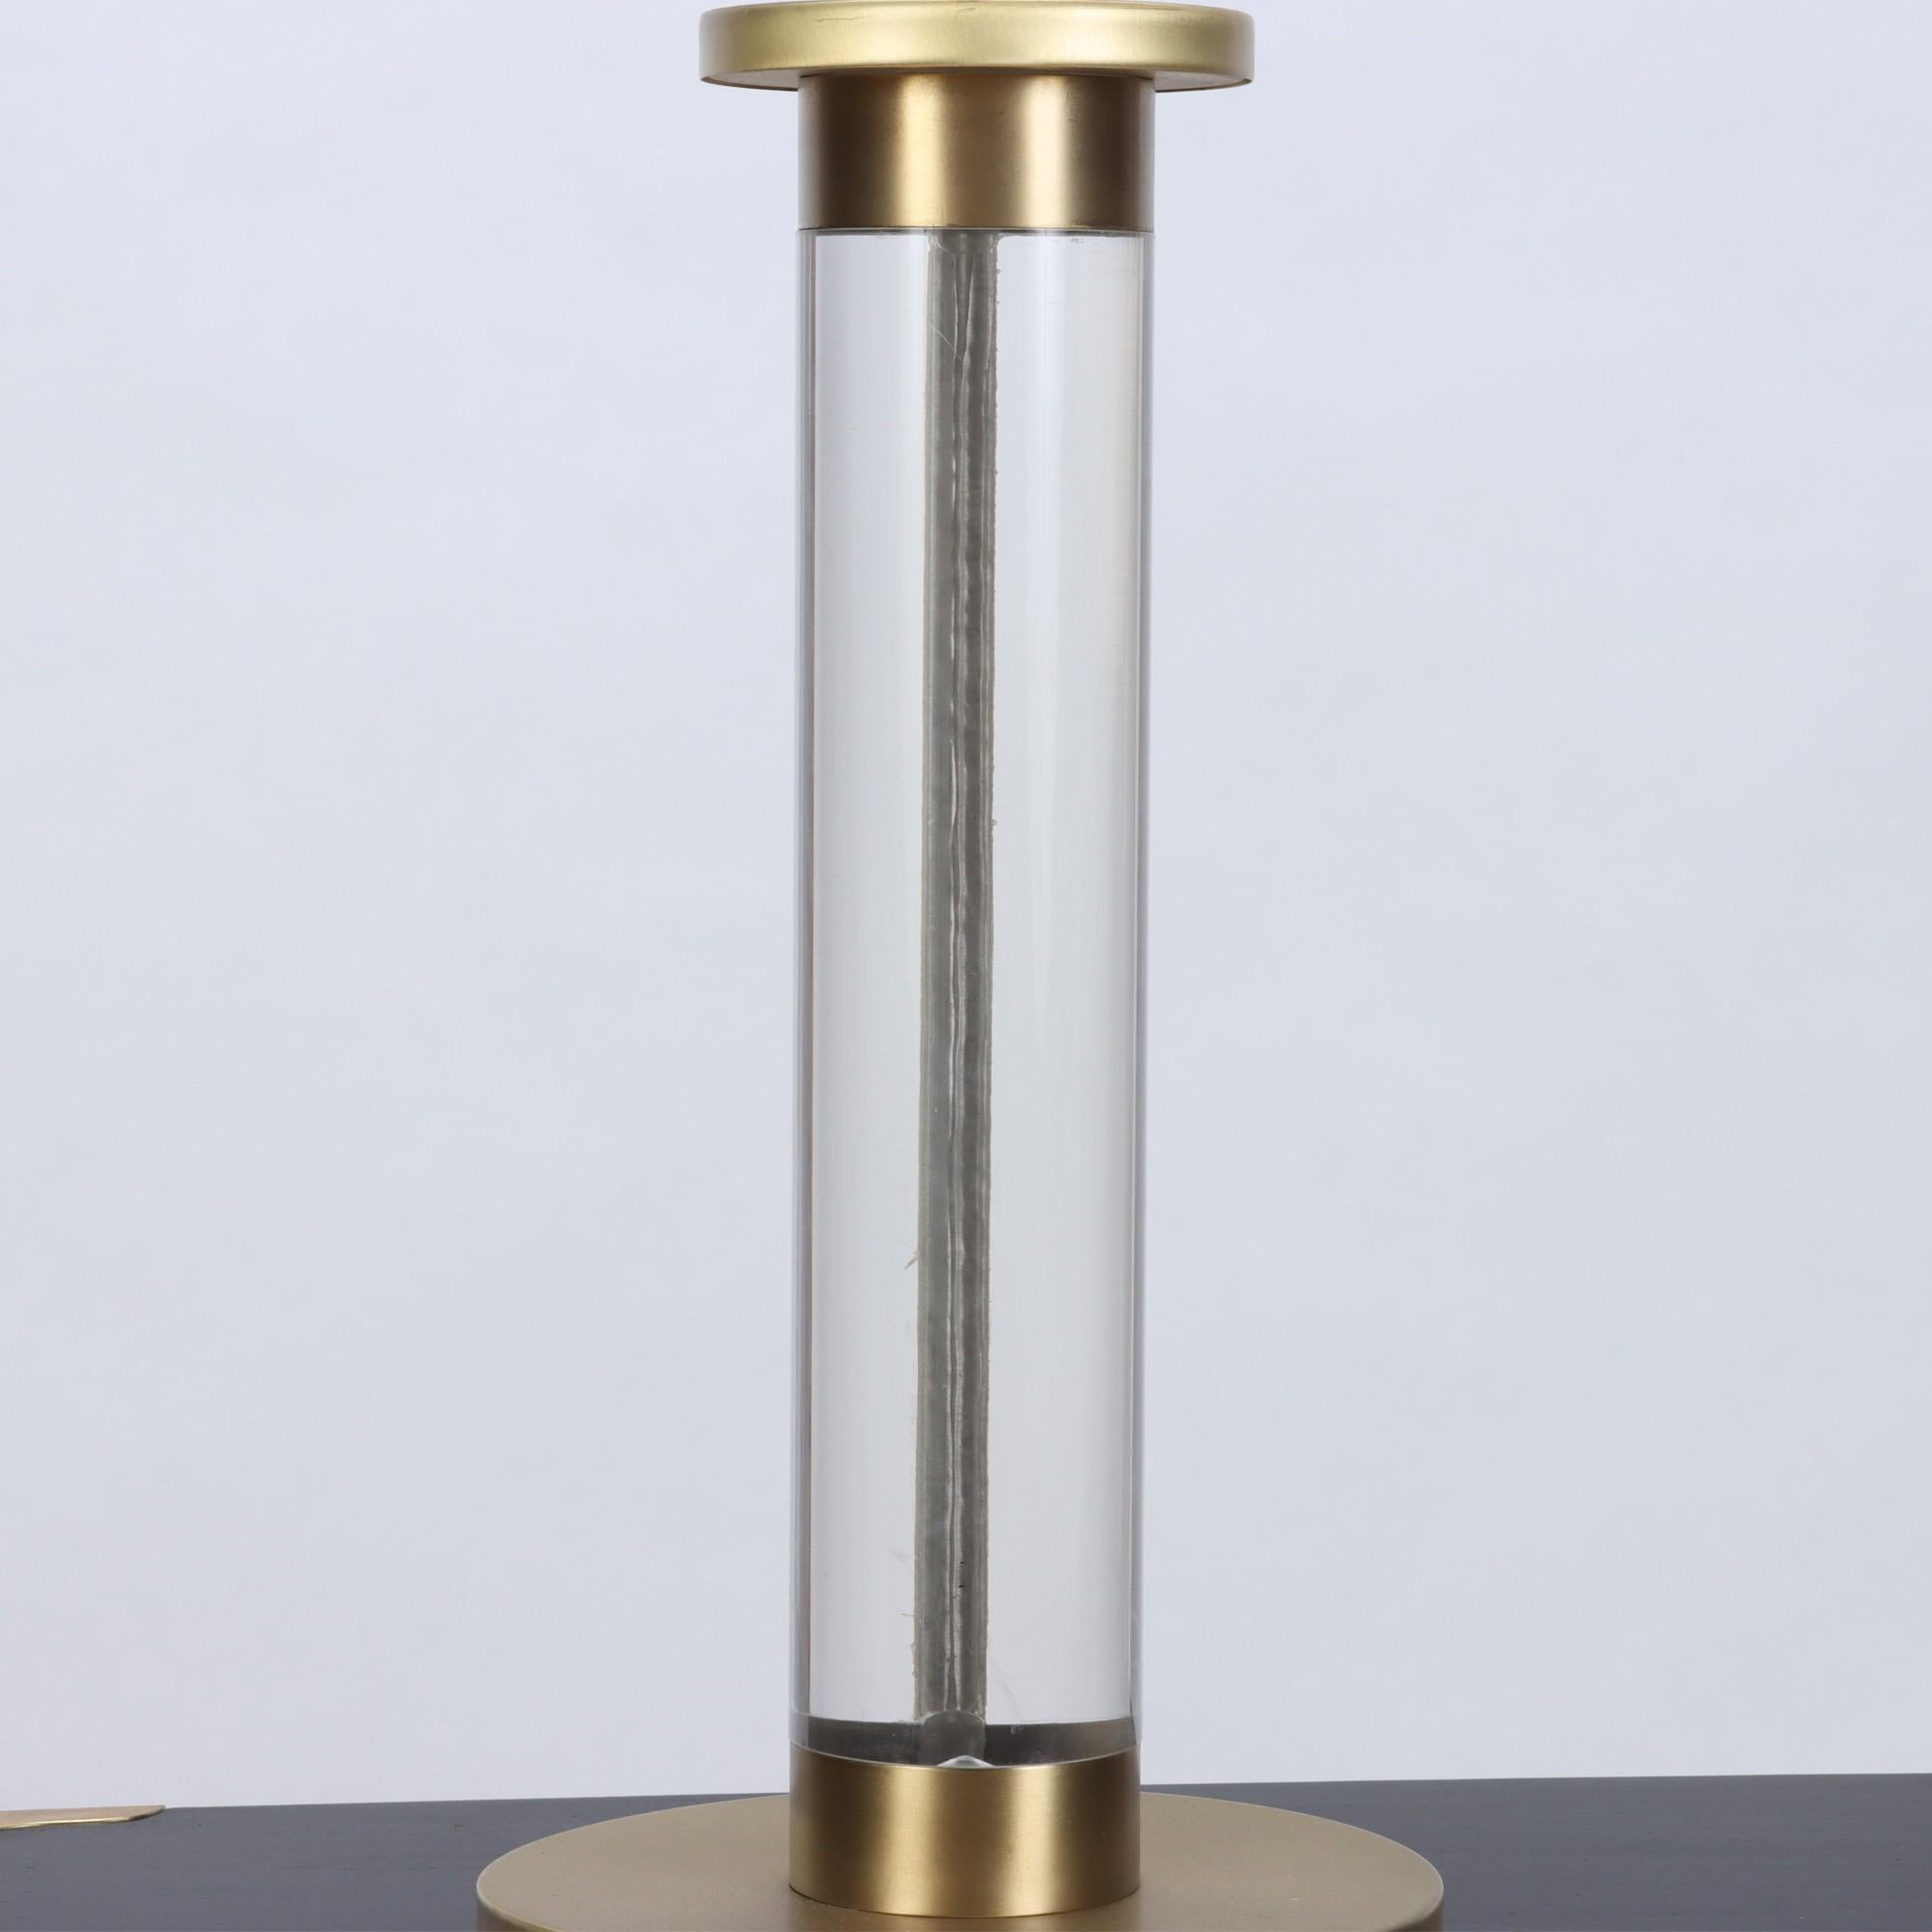 Pair of Modern Lucite Brass Column Table Lamps, circa 1950 For Sale 1